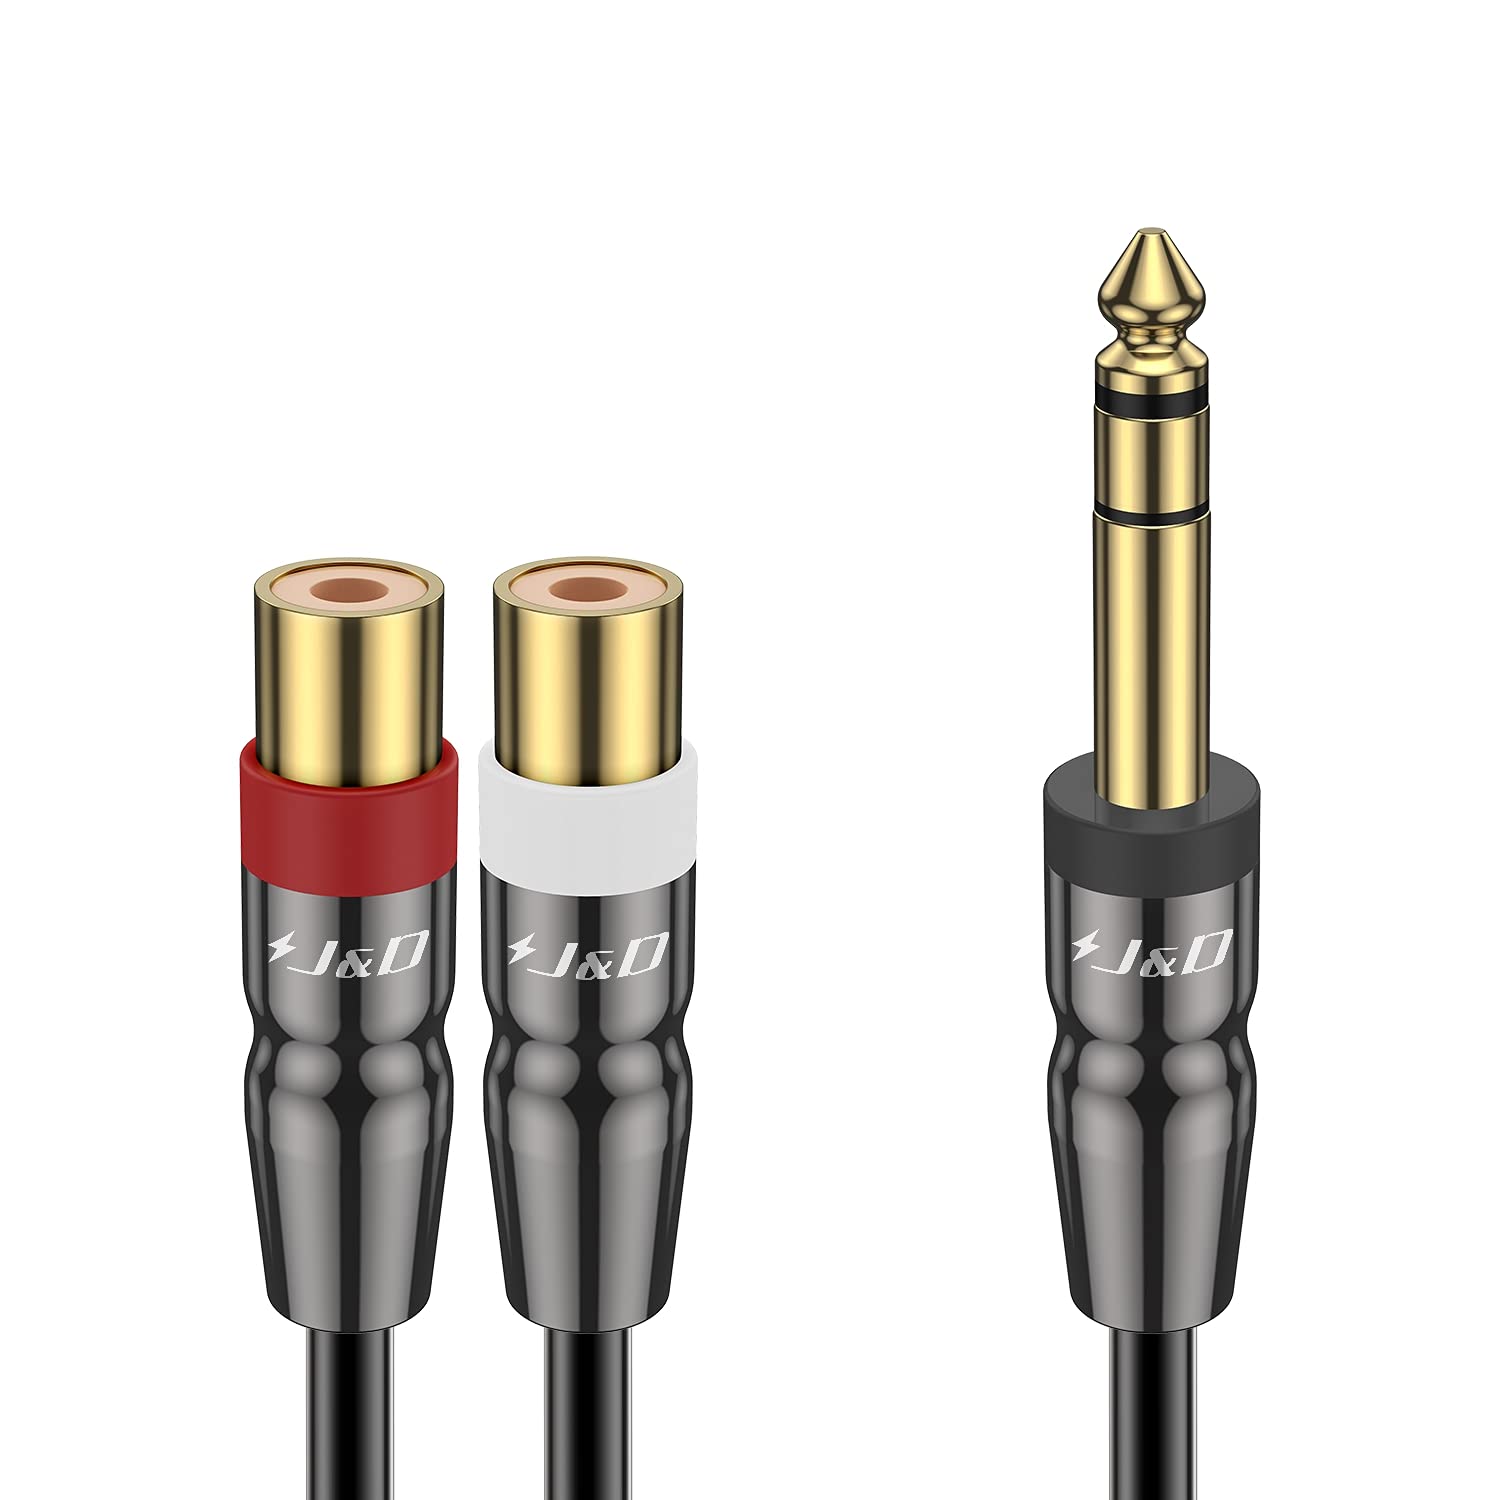 J&D USB-C to 6.35mm 1/4 inch TS Audio Cable, Gold Plated USB Type